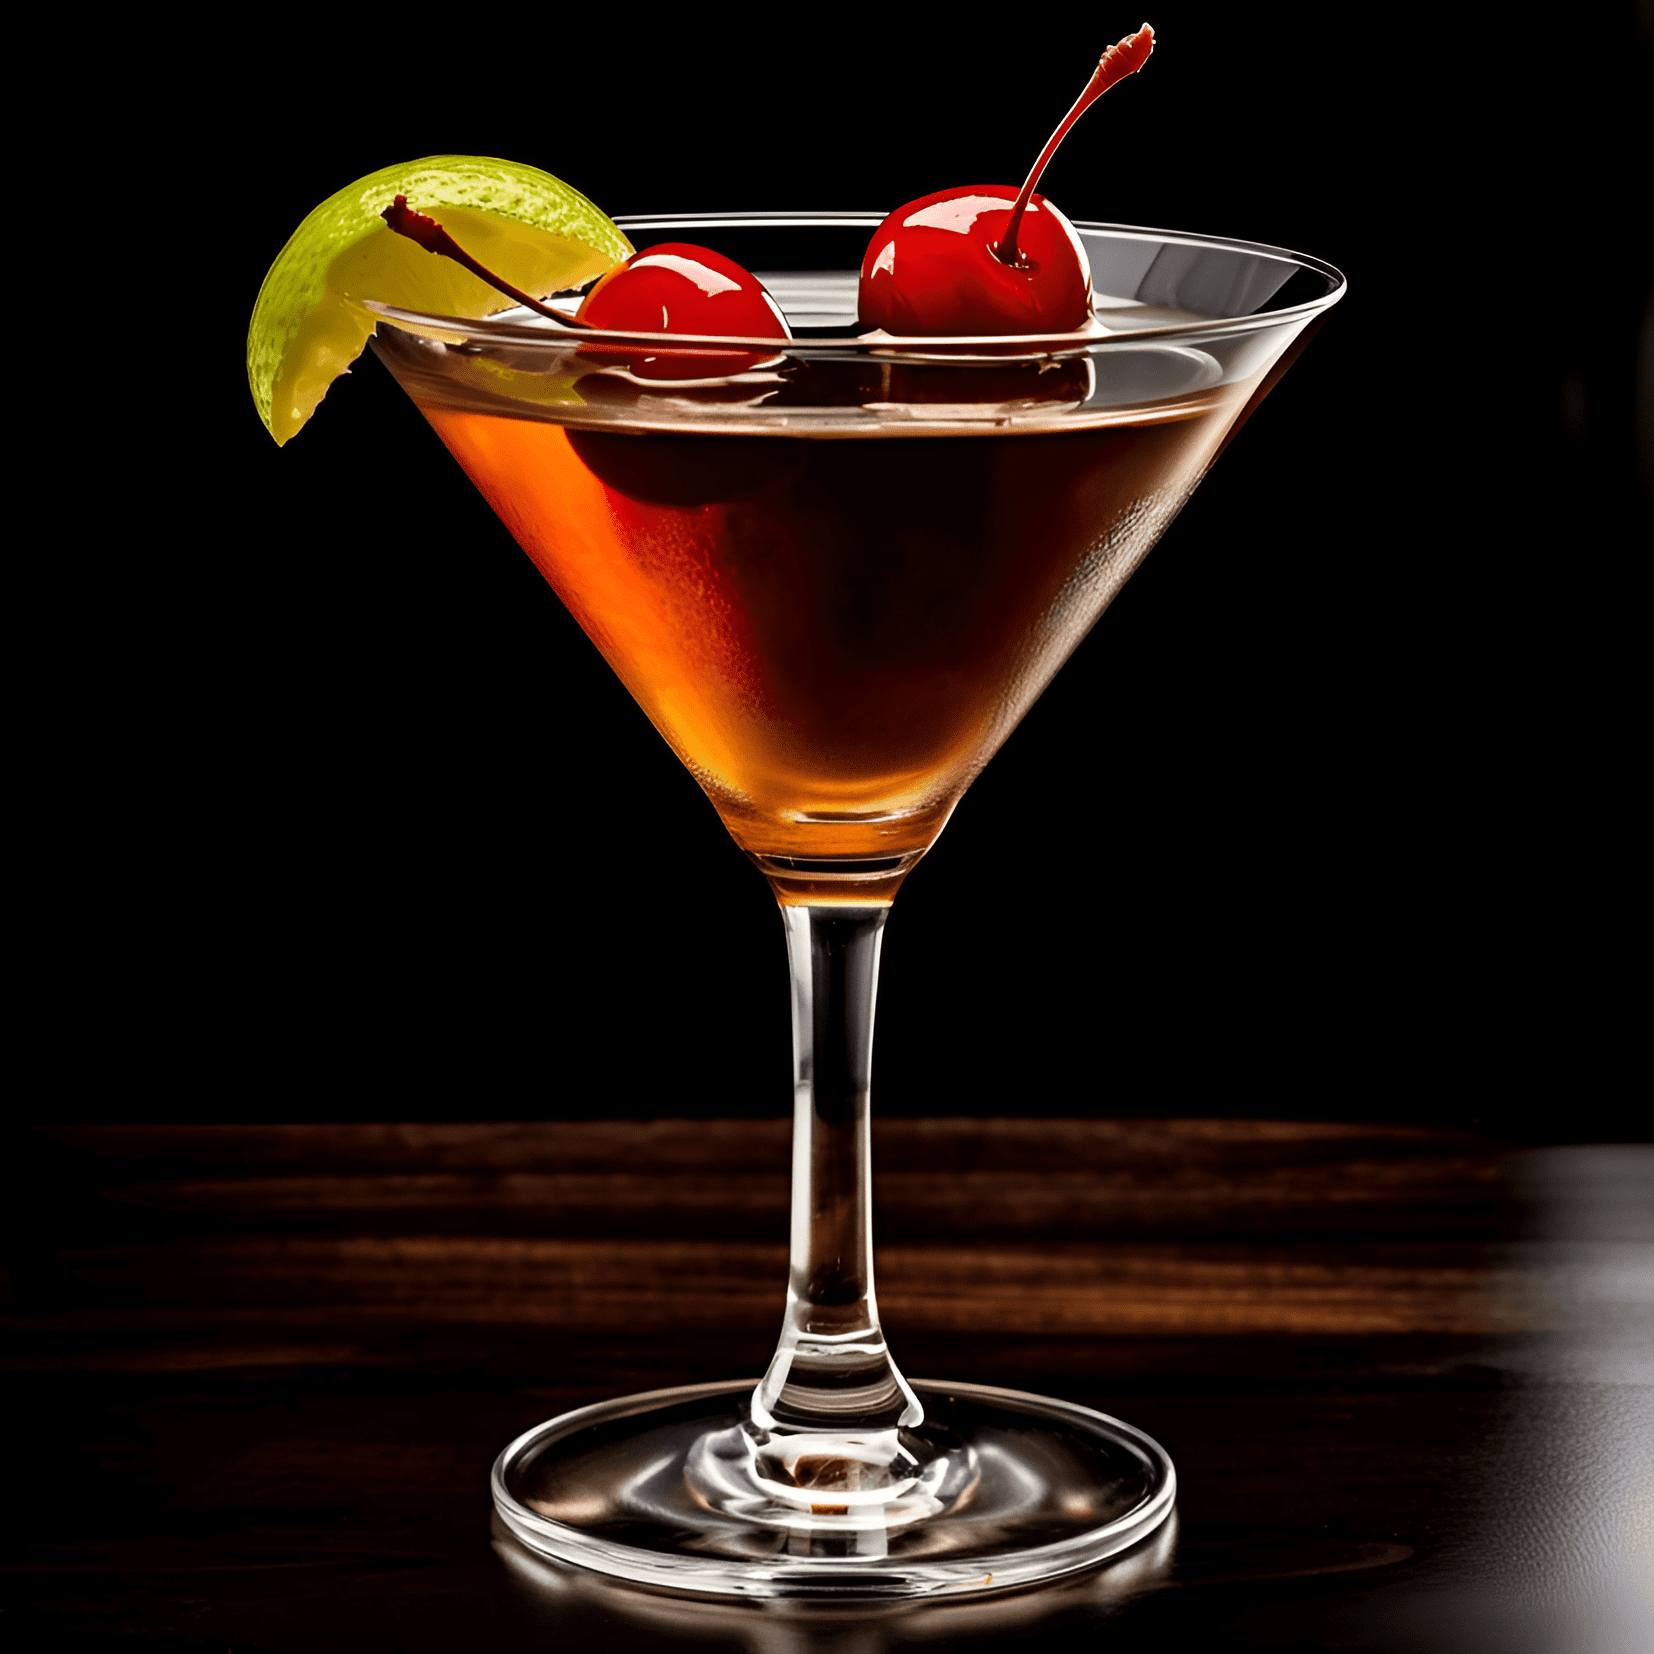 Cuban Missile Crisis Cocktail Recipe - This cocktail has a bold, complex taste with a perfect balance of sweet, sour, and bitter flavors. The rum provides a strong, warming sensation, while the lime juice adds a refreshing tanginess. The bitters and sugar syrup round out the flavor profile, making it a truly satisfying and memorable drink.